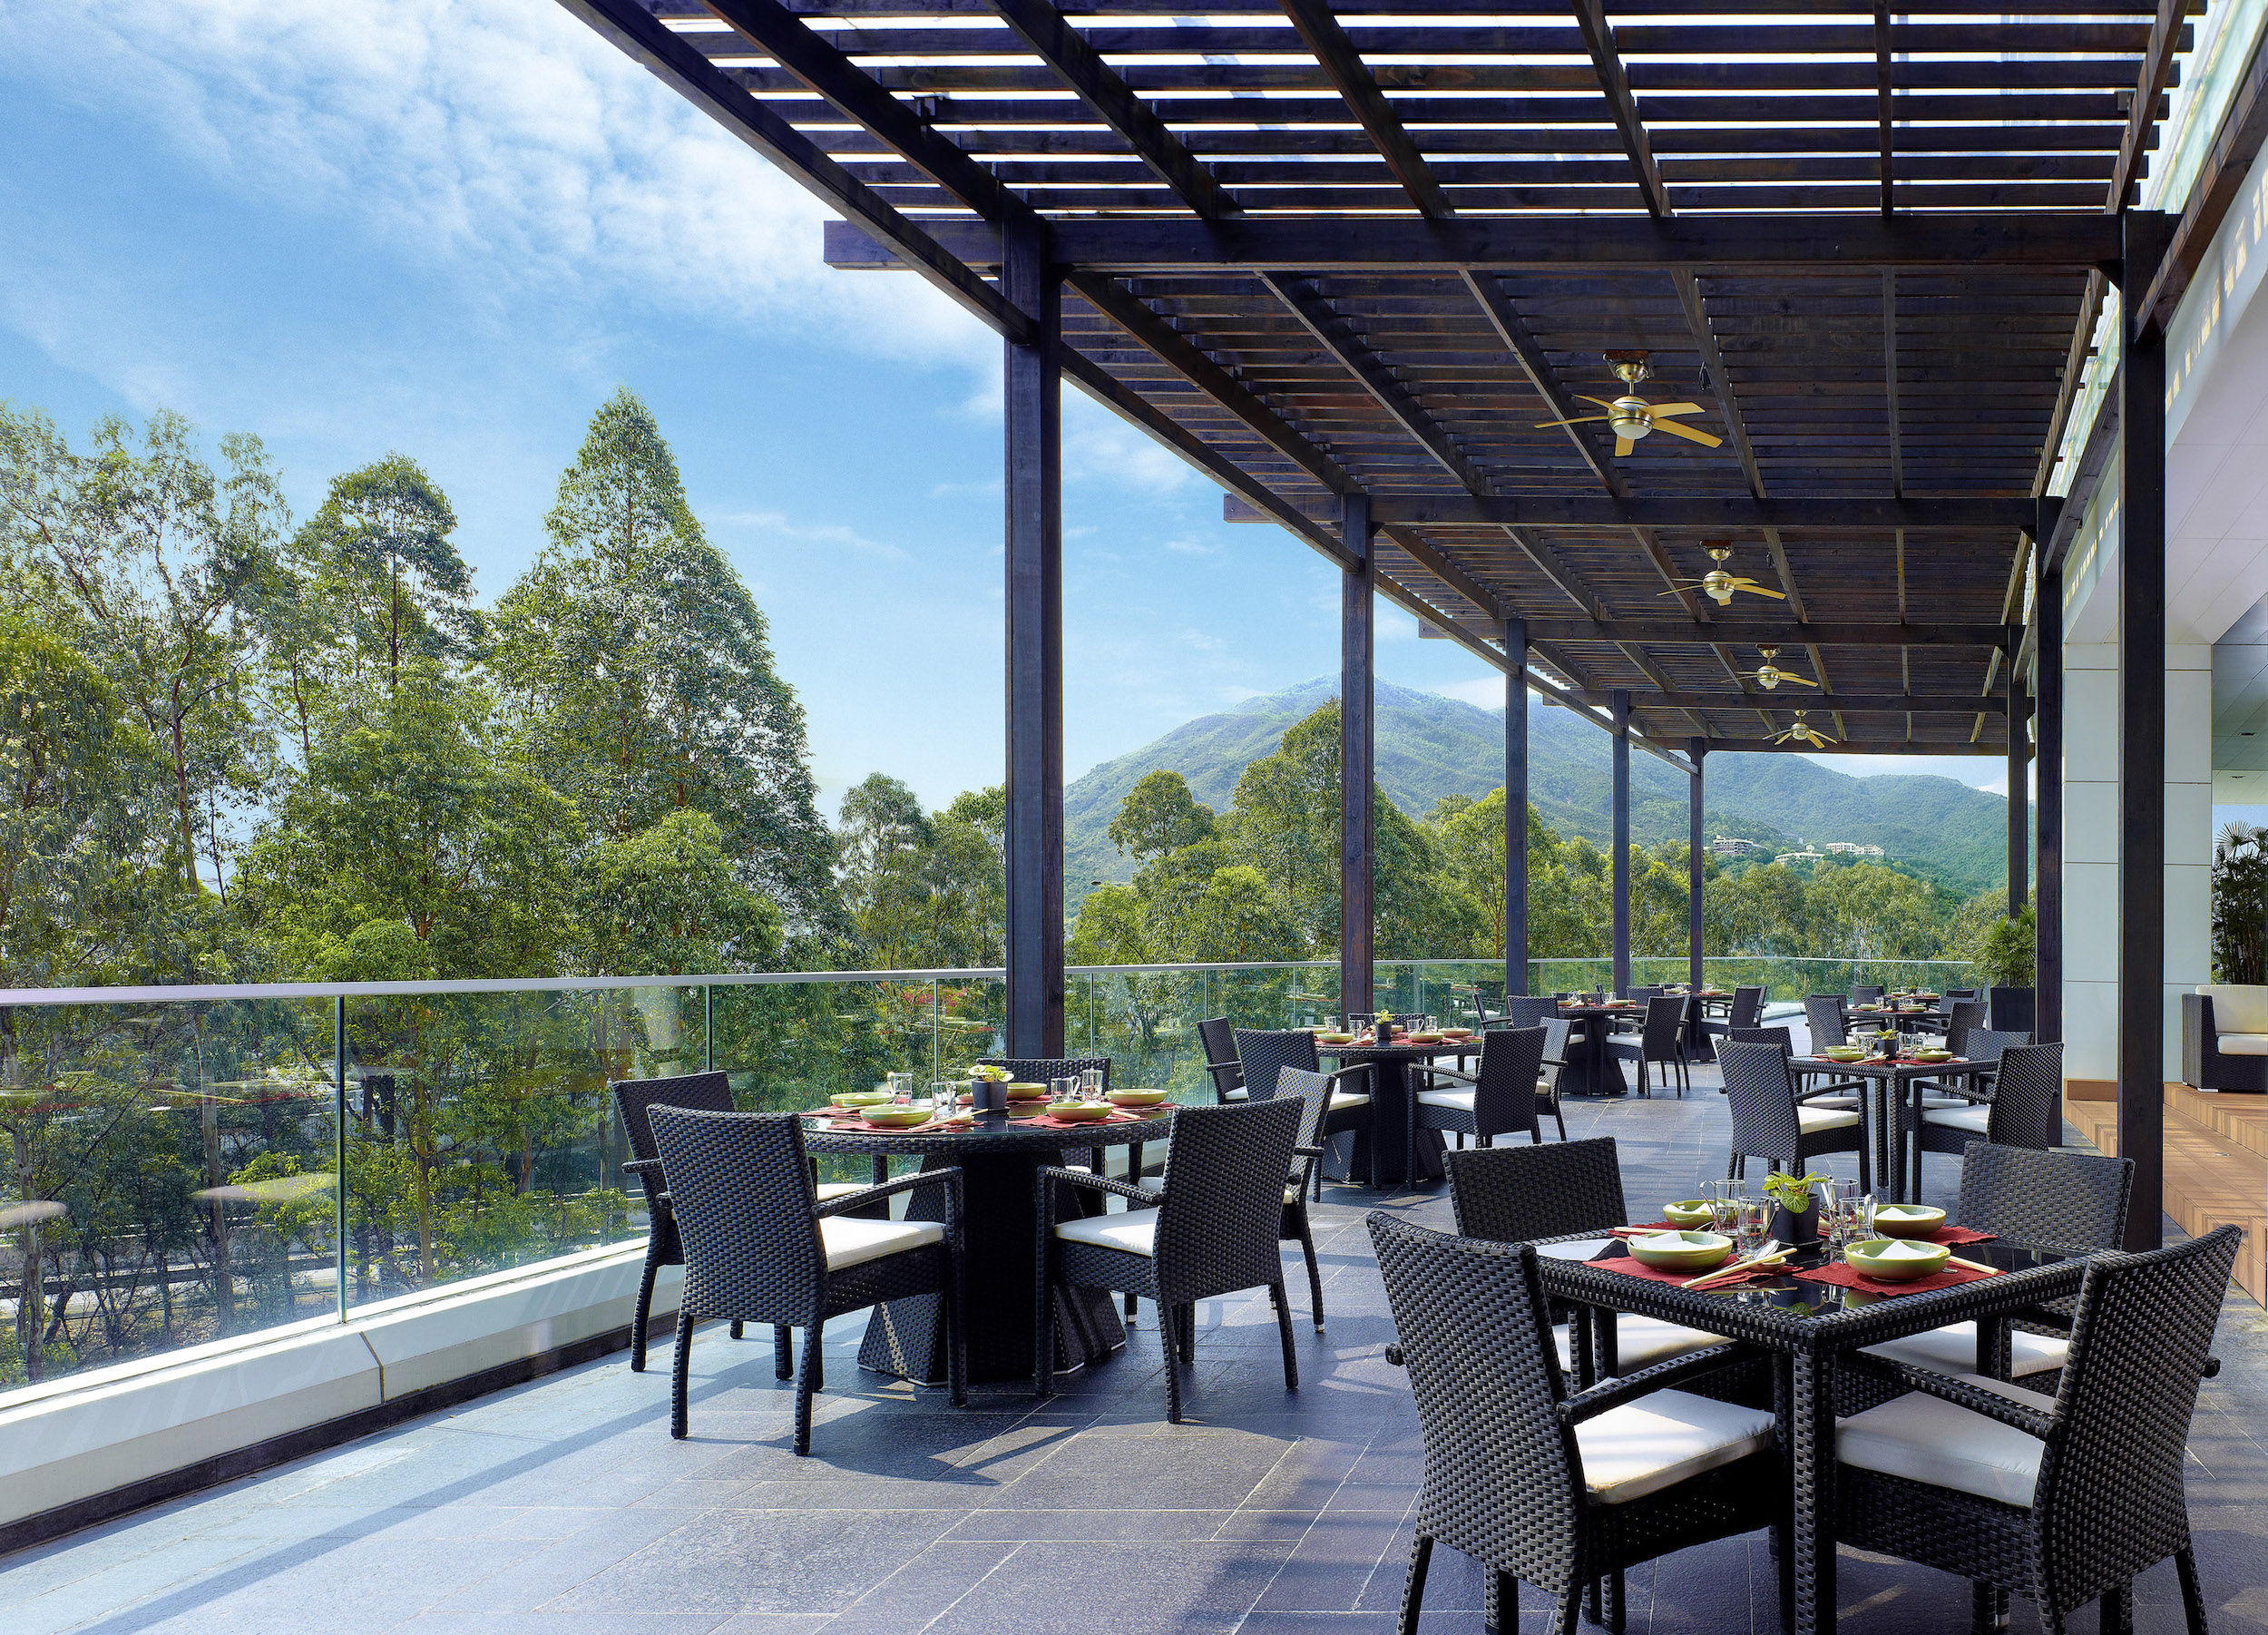 5 unique dining experiences in Hong Kong’s New Territories